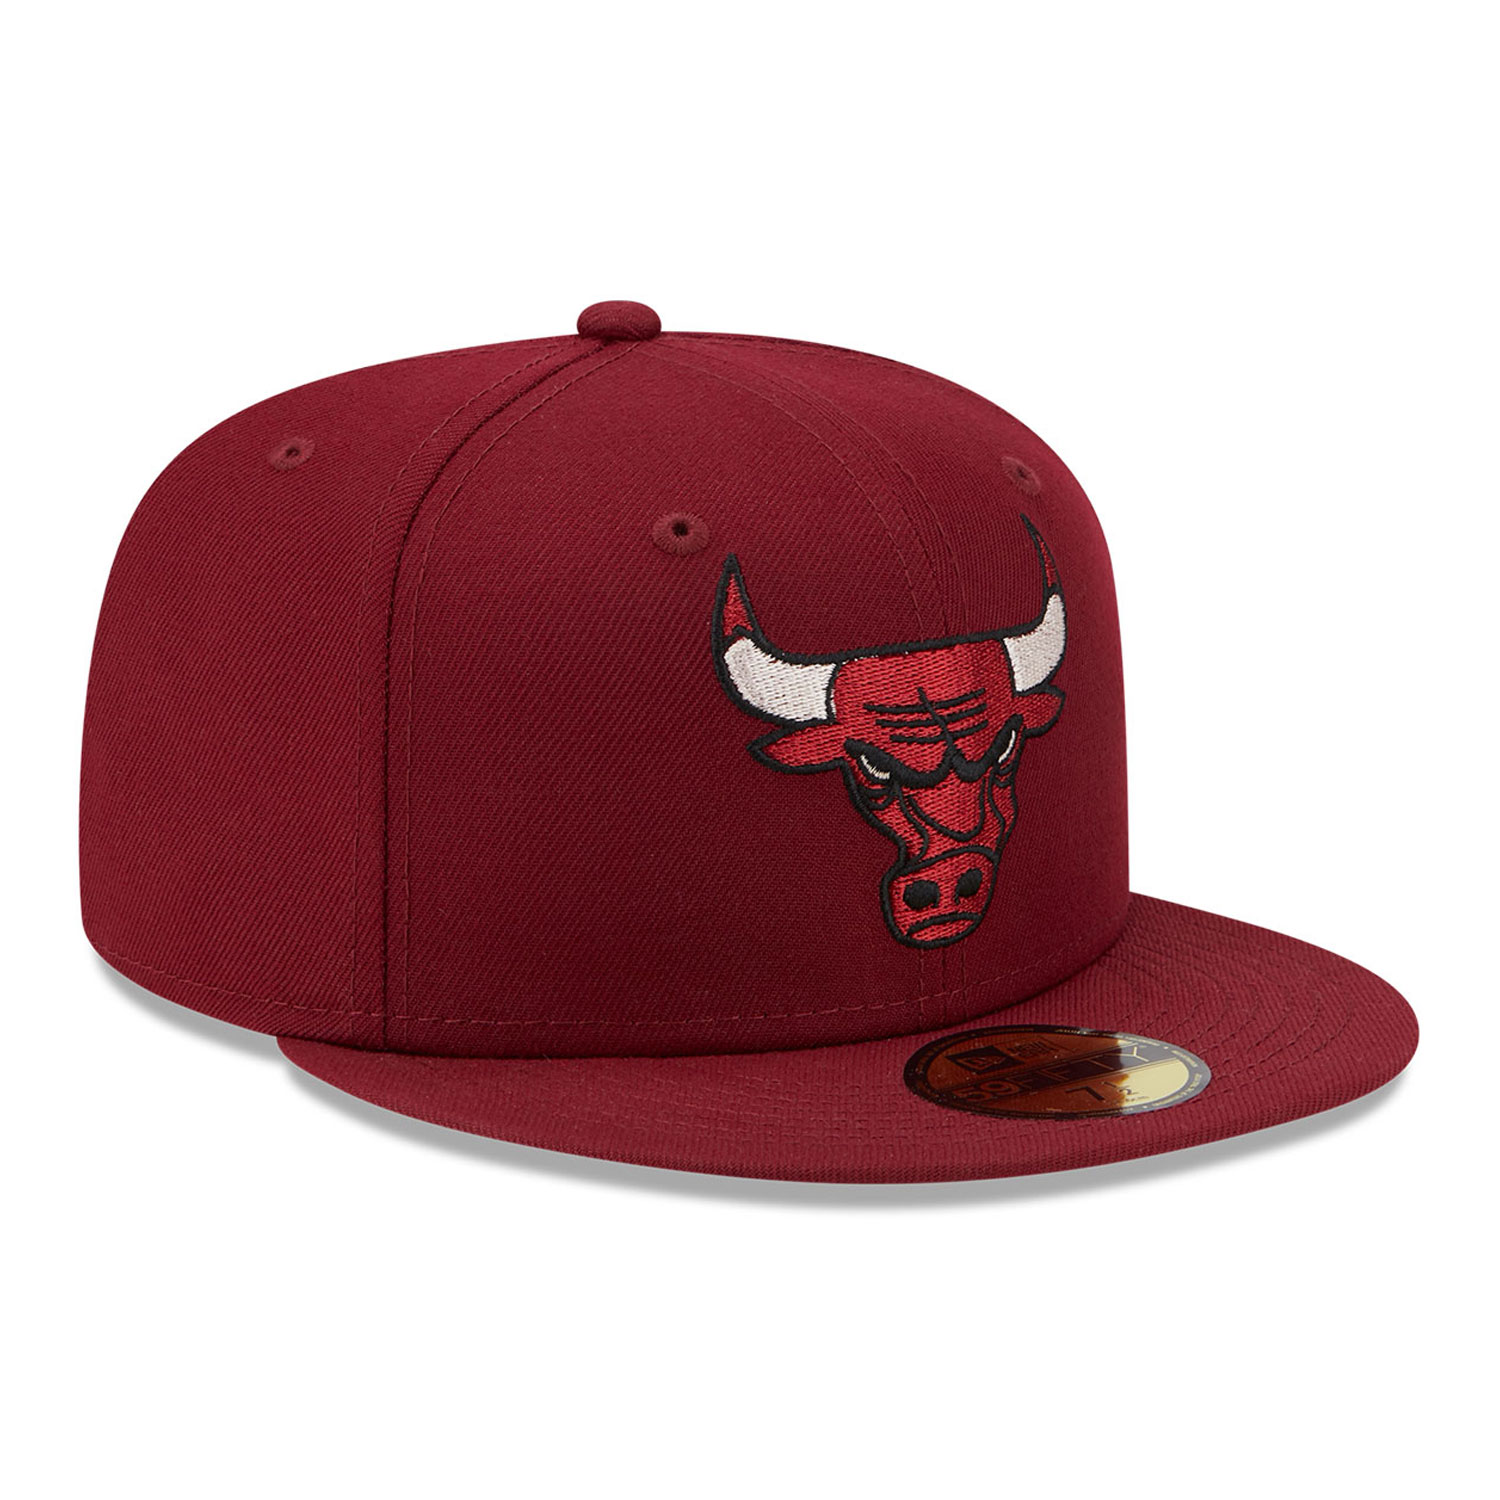 Chicago Bulls Twilight Fantasy Dark Red 59FIFTY Fitted Cap